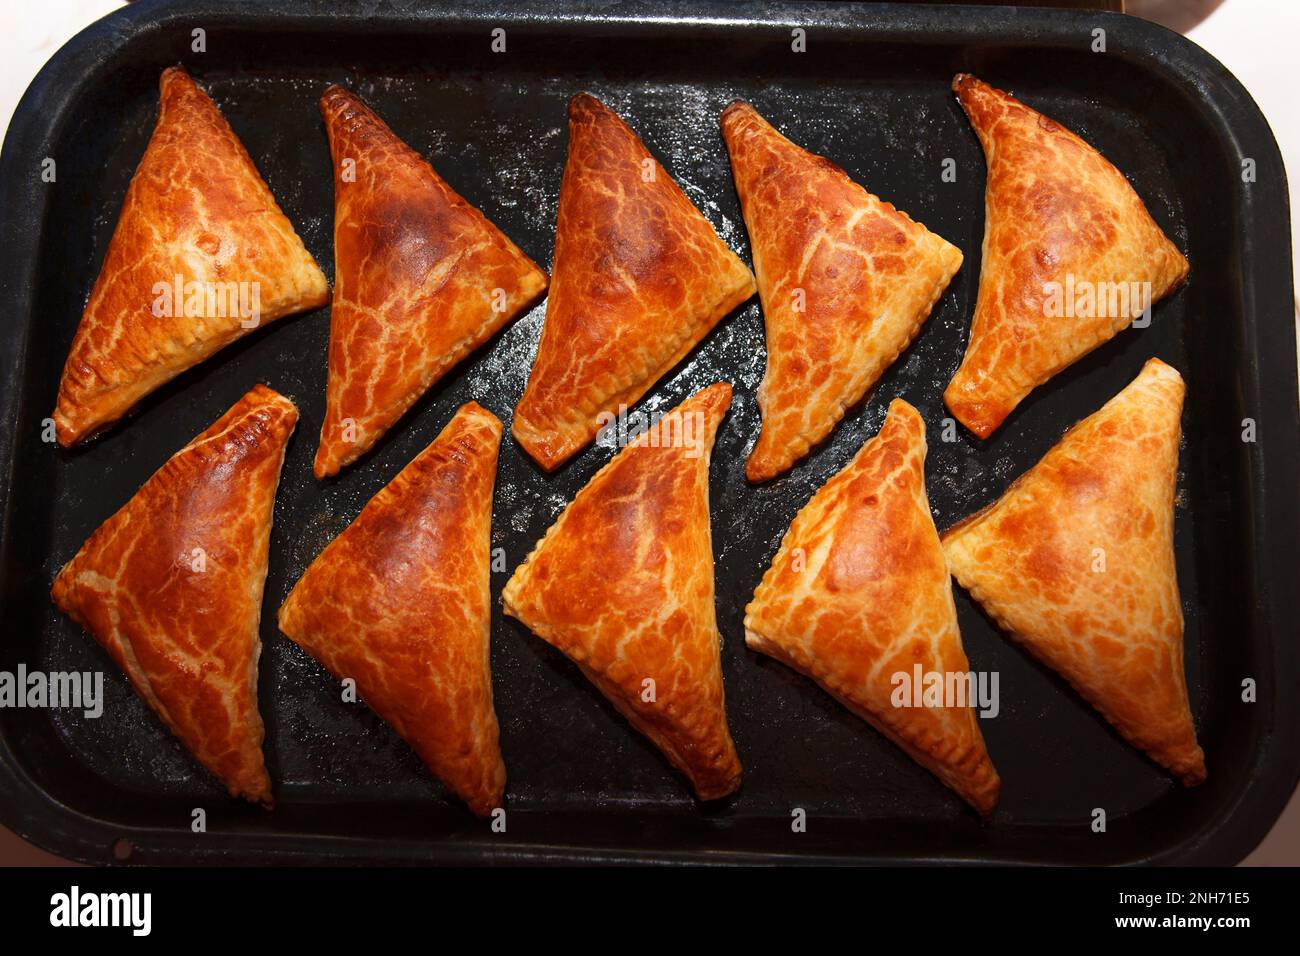 Freshly baked delicious hot patties filled with oven, triangular shape lie on a baking sheet Stock Photo